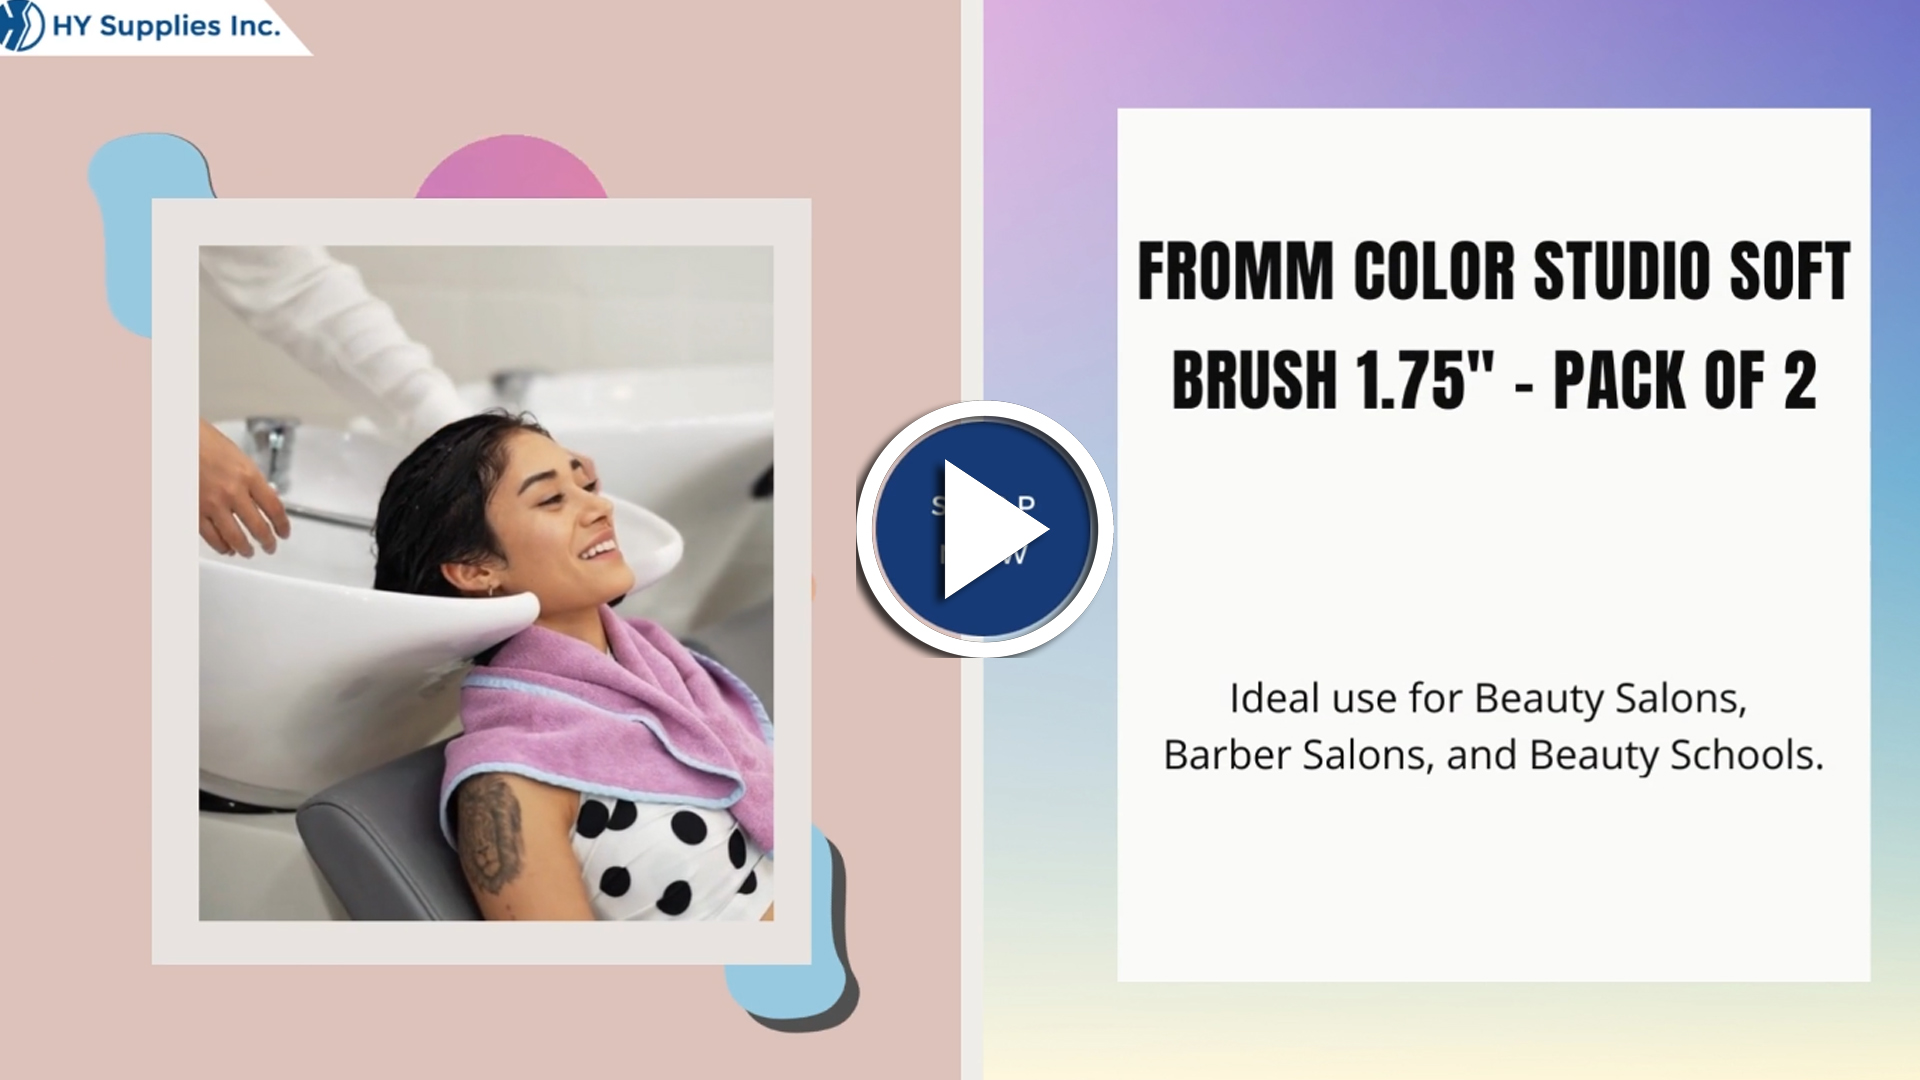 Fromm Color Studio Soft Brush 1.75"" - Pack of 2